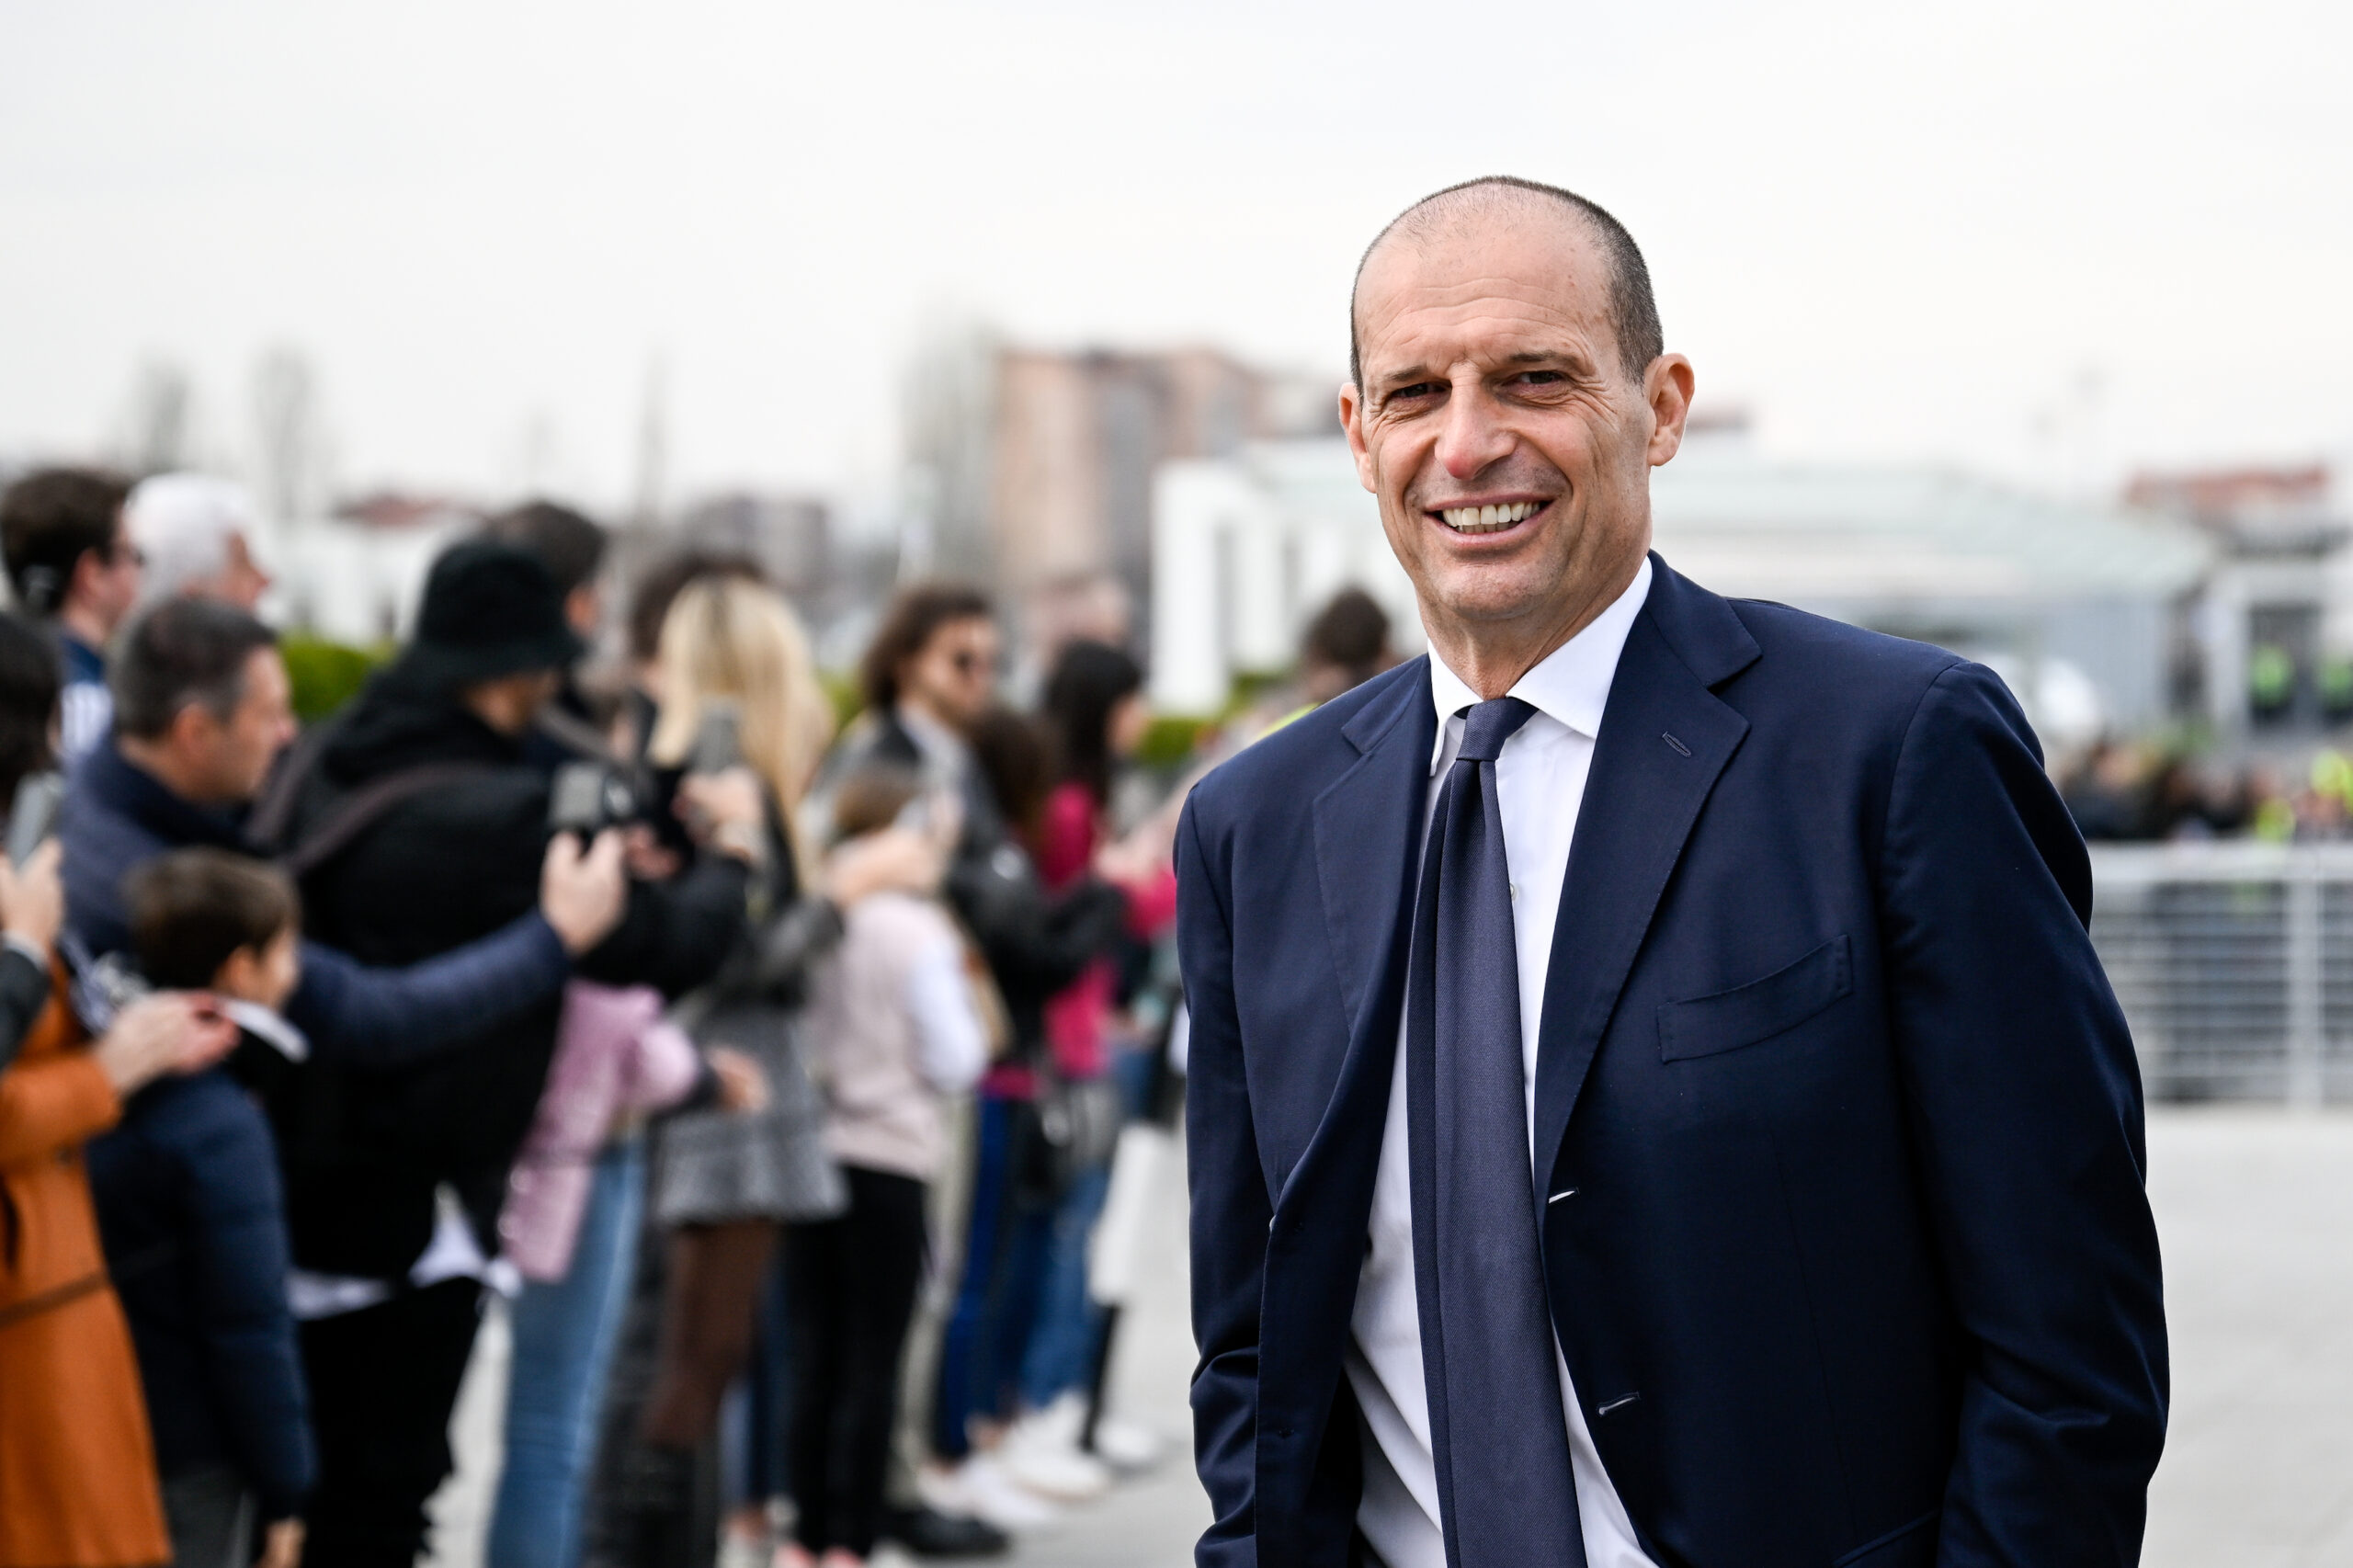 Massimiliano Allegri is losing supporters inside the club as Juventus keep slumping on the pitch, but it’s not yet certain the management will sack him